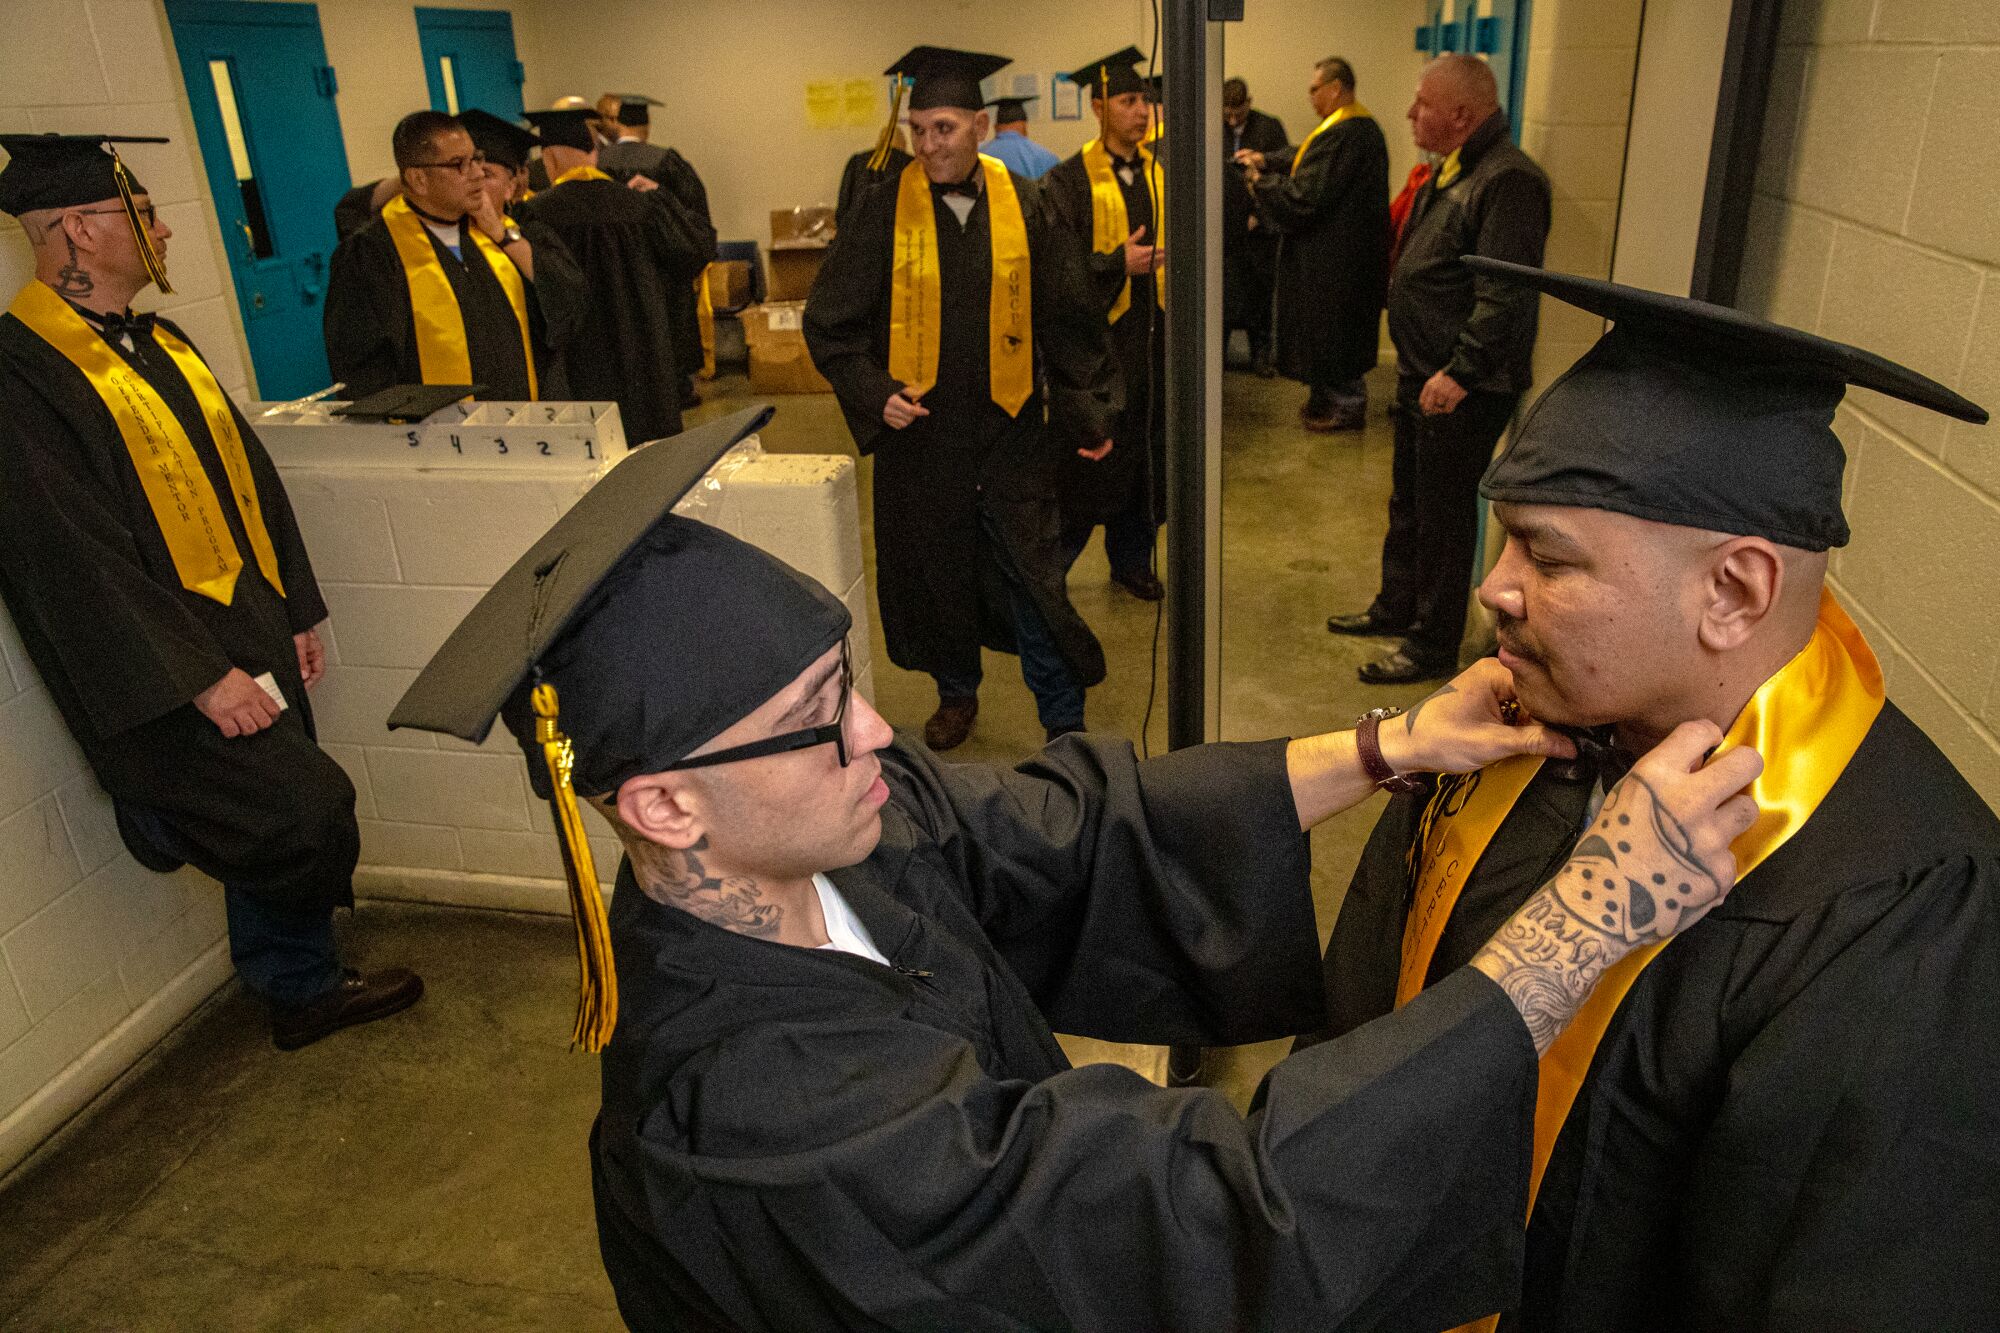 A man in cap and gown adjusts the gold sash around the neck of another man in cap and gown 